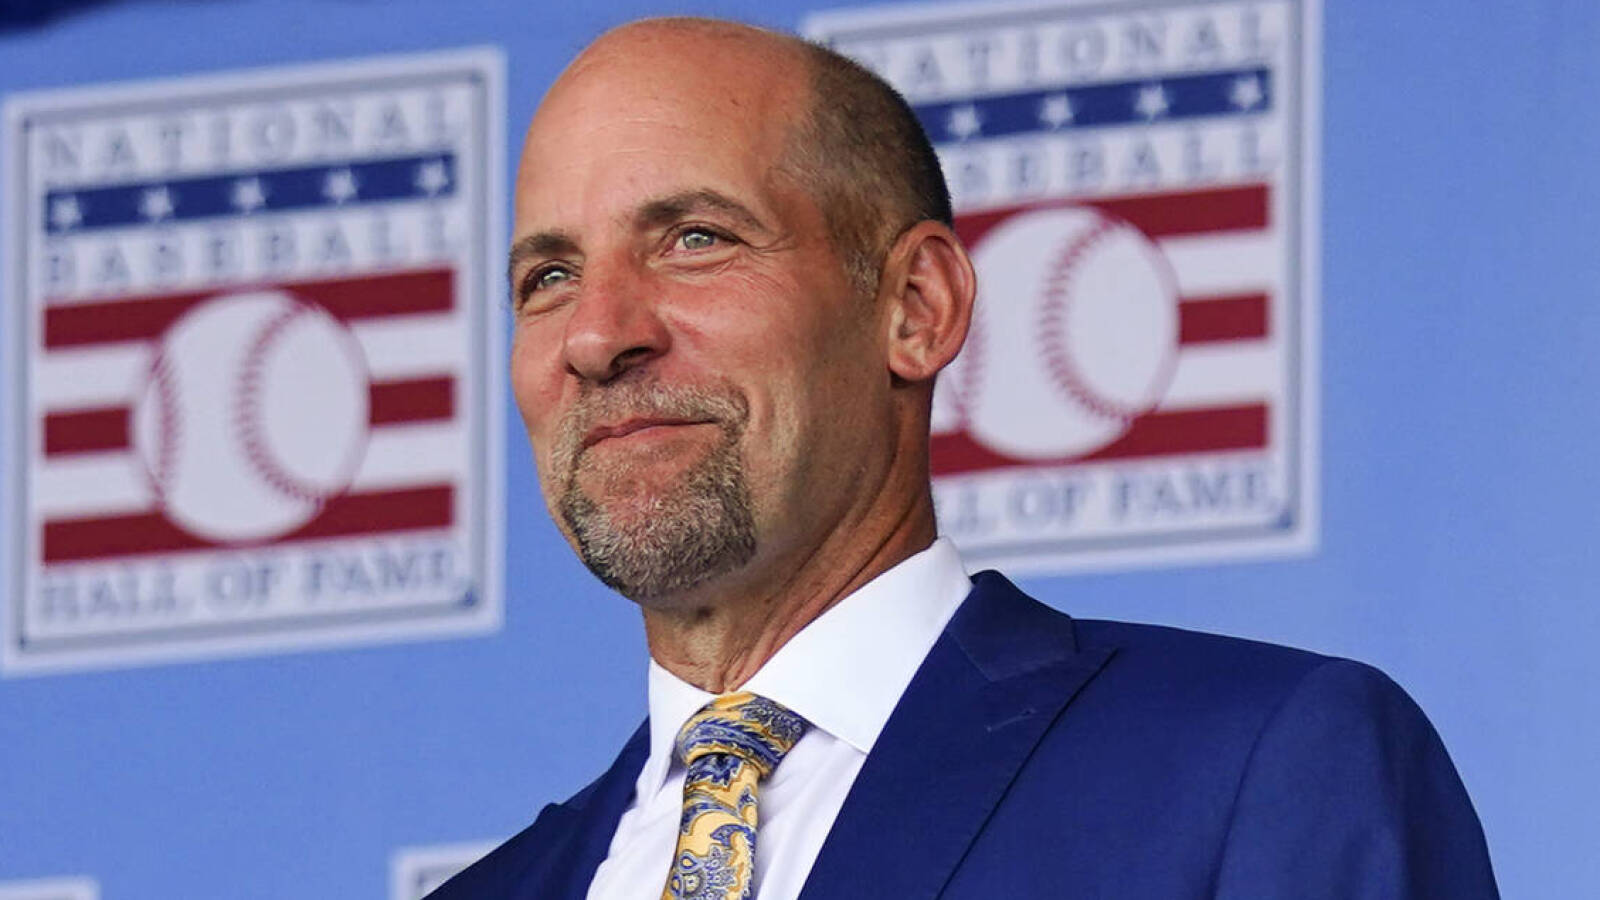 Hall of Famer John Smoltz worked ‘Field of Dreams Game' same day his father died